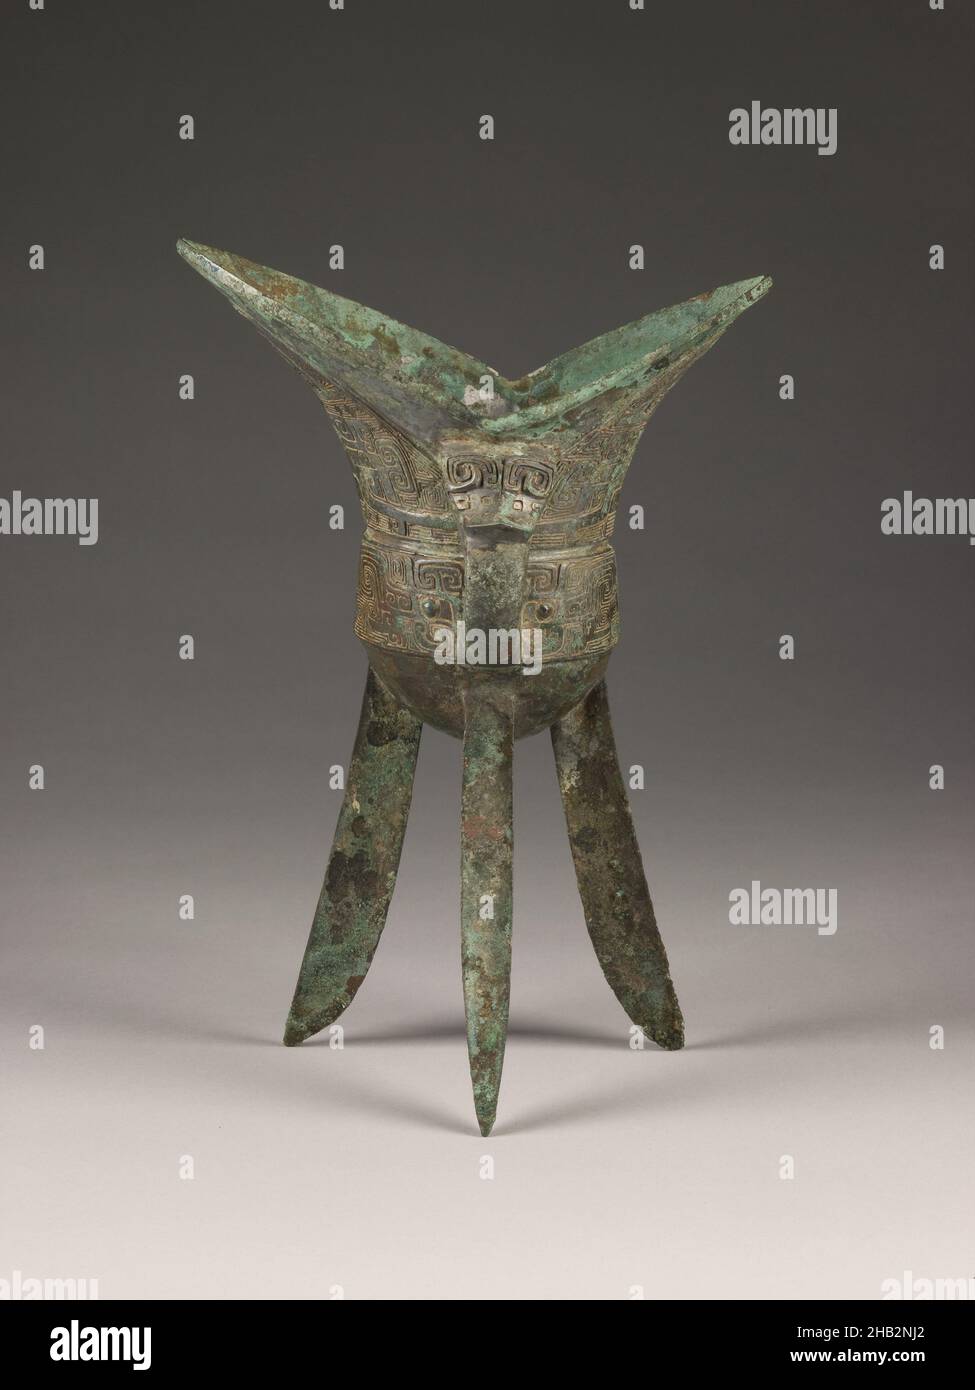 Tripod Wine Vessel (jiao) with Design of Zoomorphic Masks and Spiral Patterns, Chinese, Shang dynasty, 1600–1050 BC, 13th century BC, Bronze, China, Asia, Containers, metalwork, height: 9 1/2 in. (24.1 cm Stock Photo